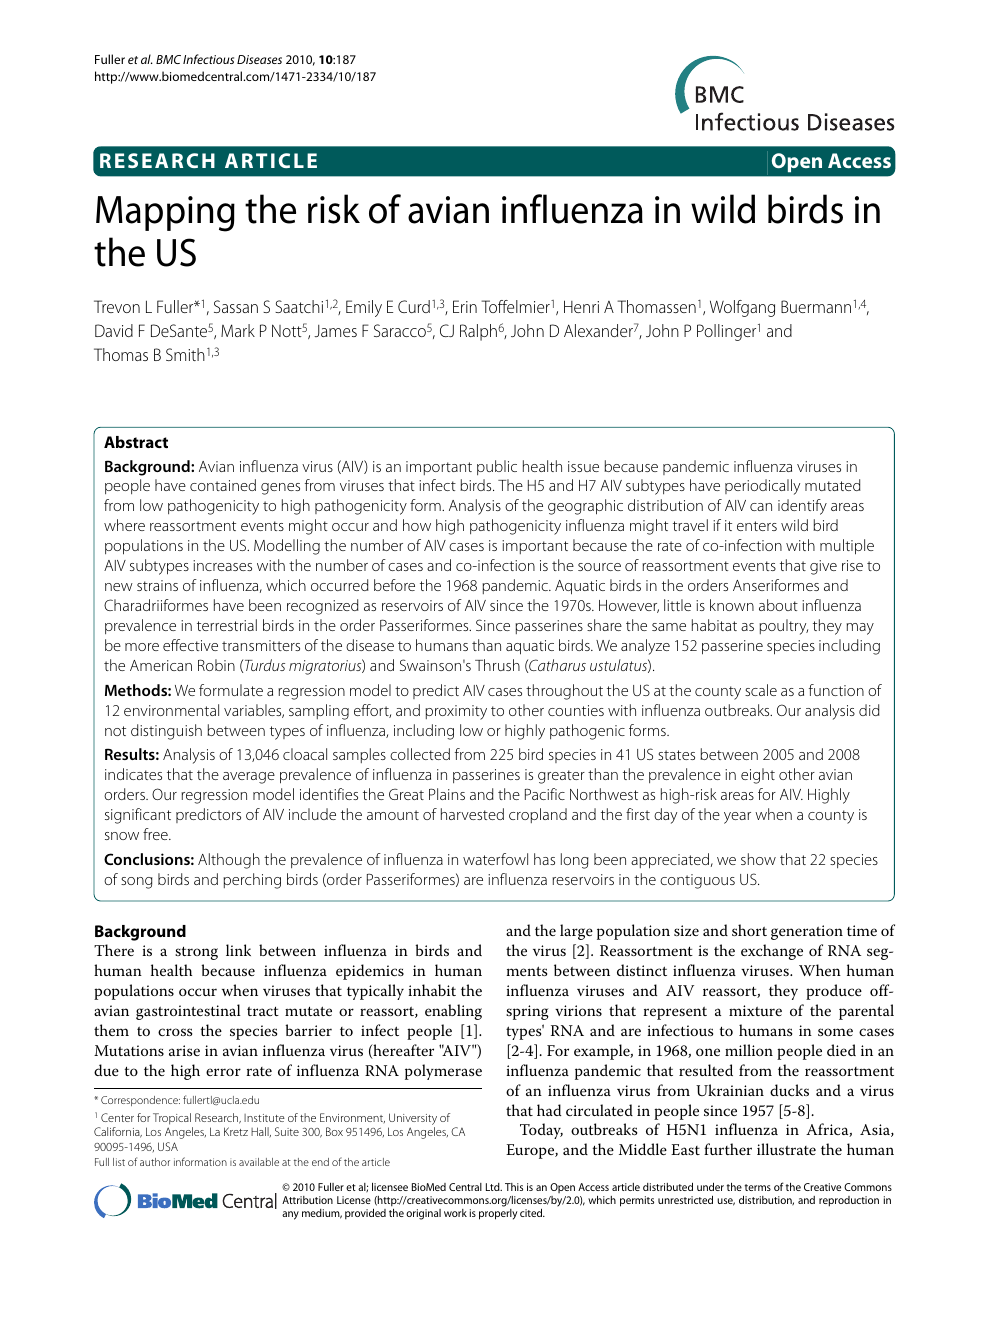 Mapping The Risk Of Avian Influenza In Wild Birds In The Us Topic Of Research Paper In Biological Sciences Download Scholarly Article Pdf And Read For Free On Cyberleninka Open Science